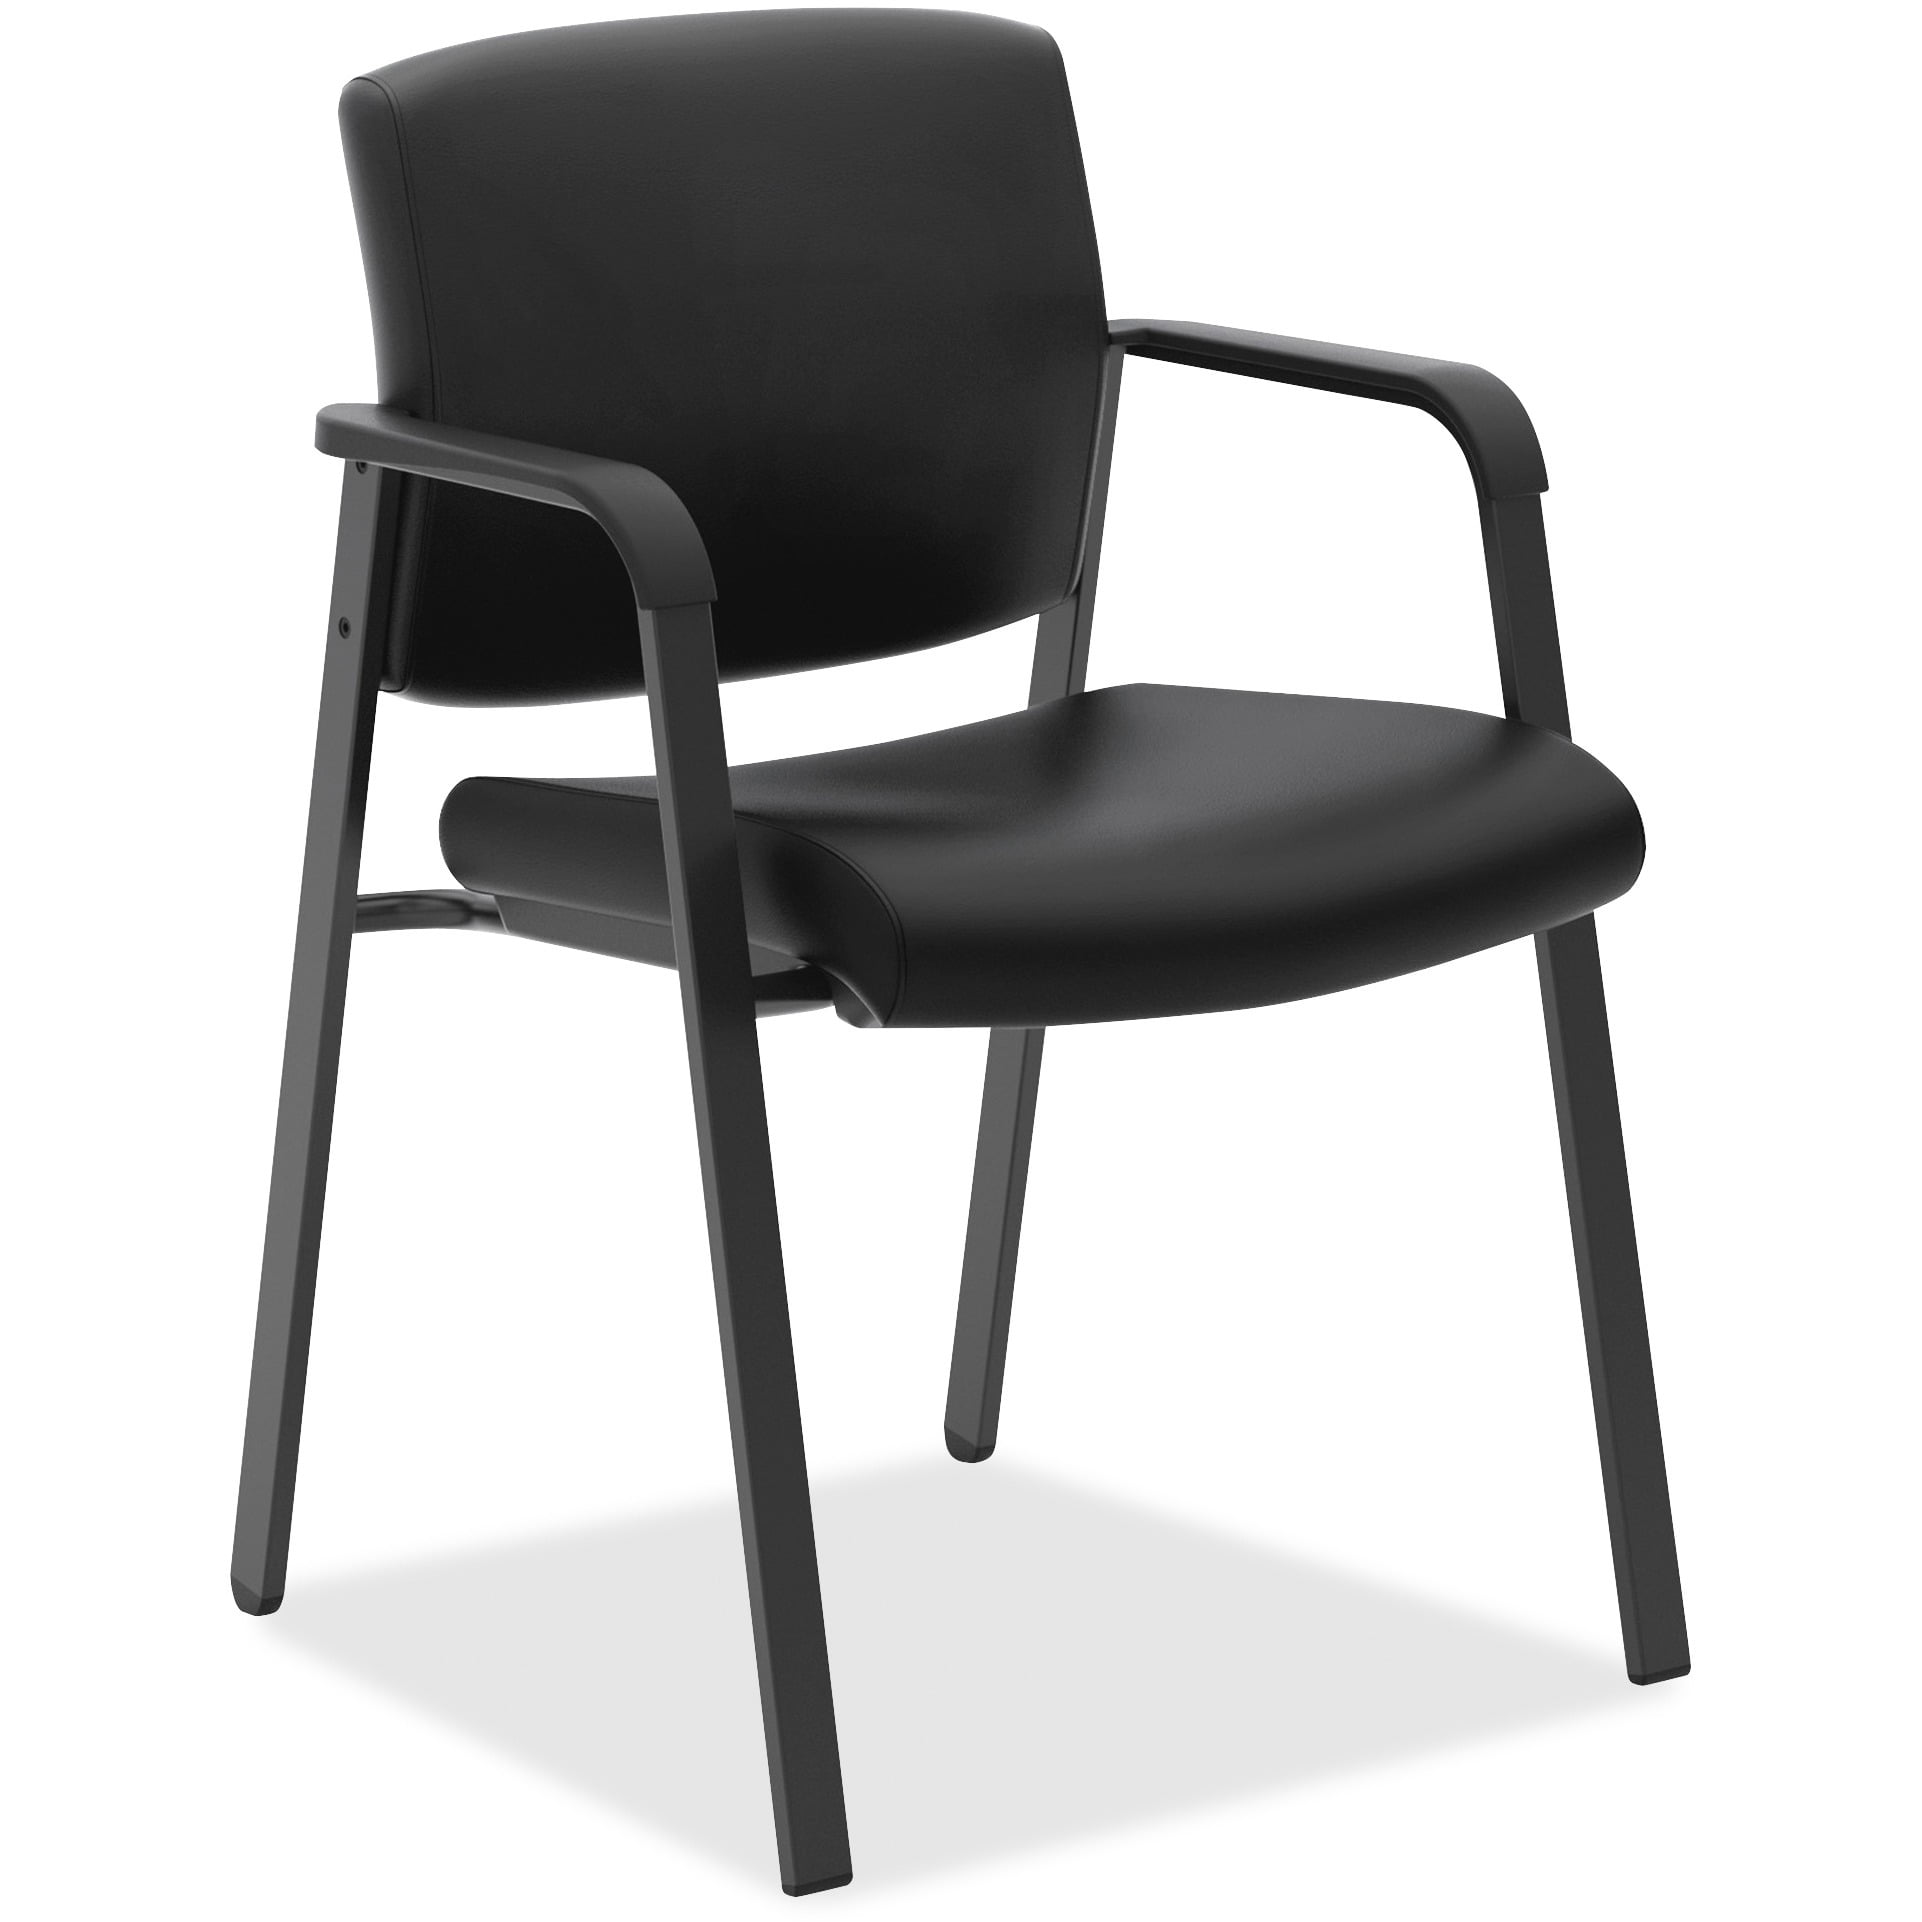 basyx VL605 Guest Reception Waiting Room Chair, Black Leather, with